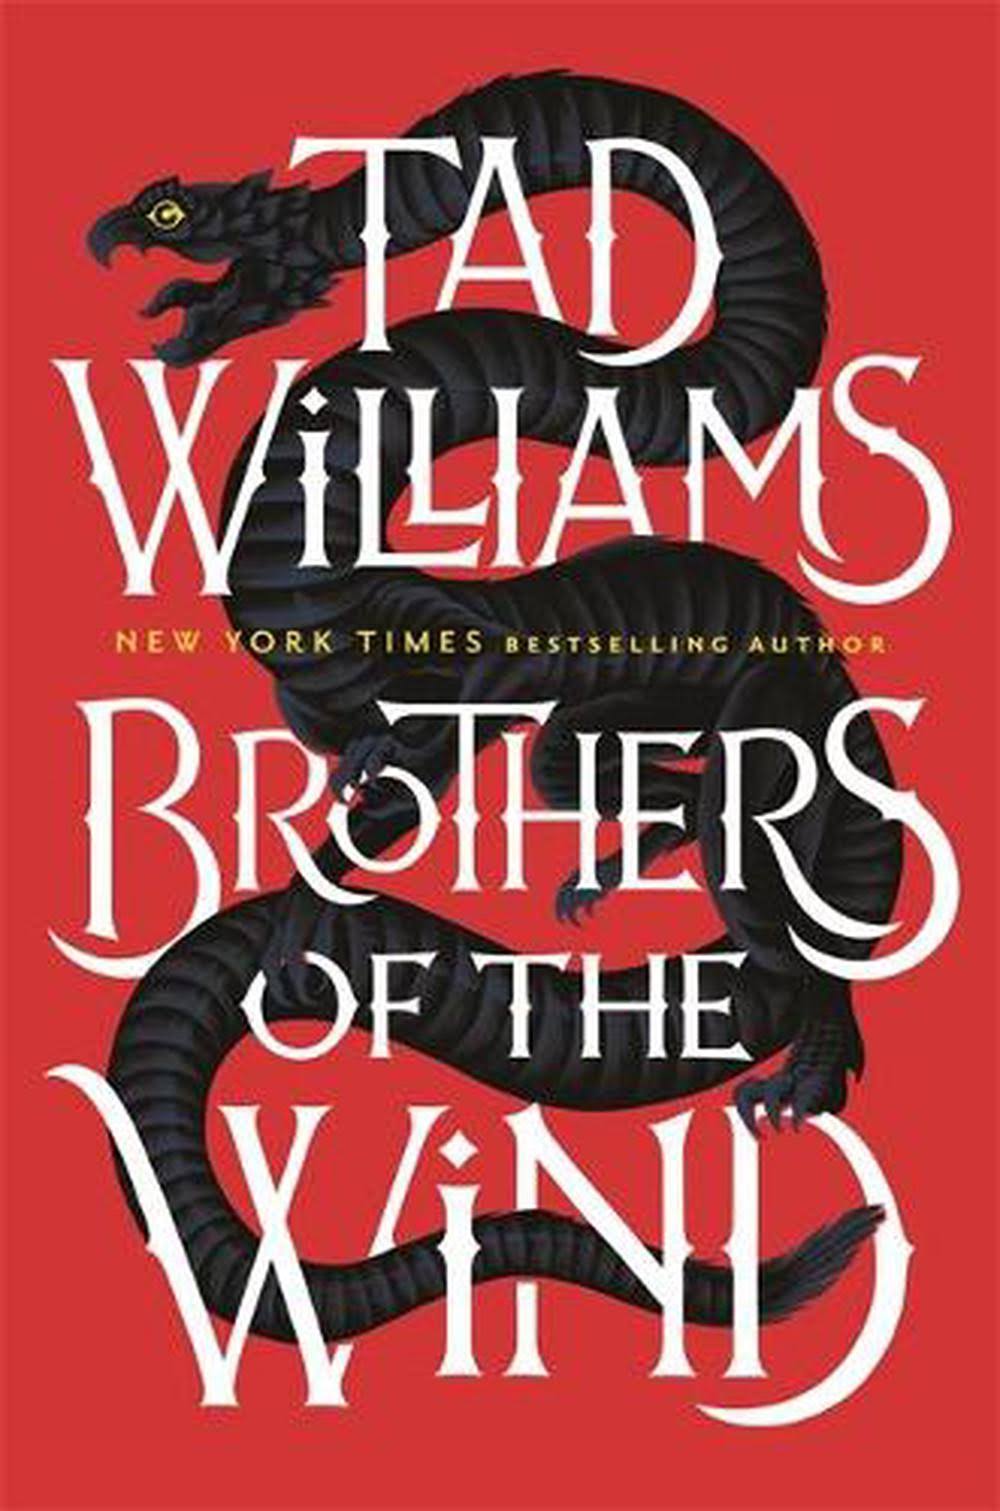 Brothers of The Wind by Tad Williams